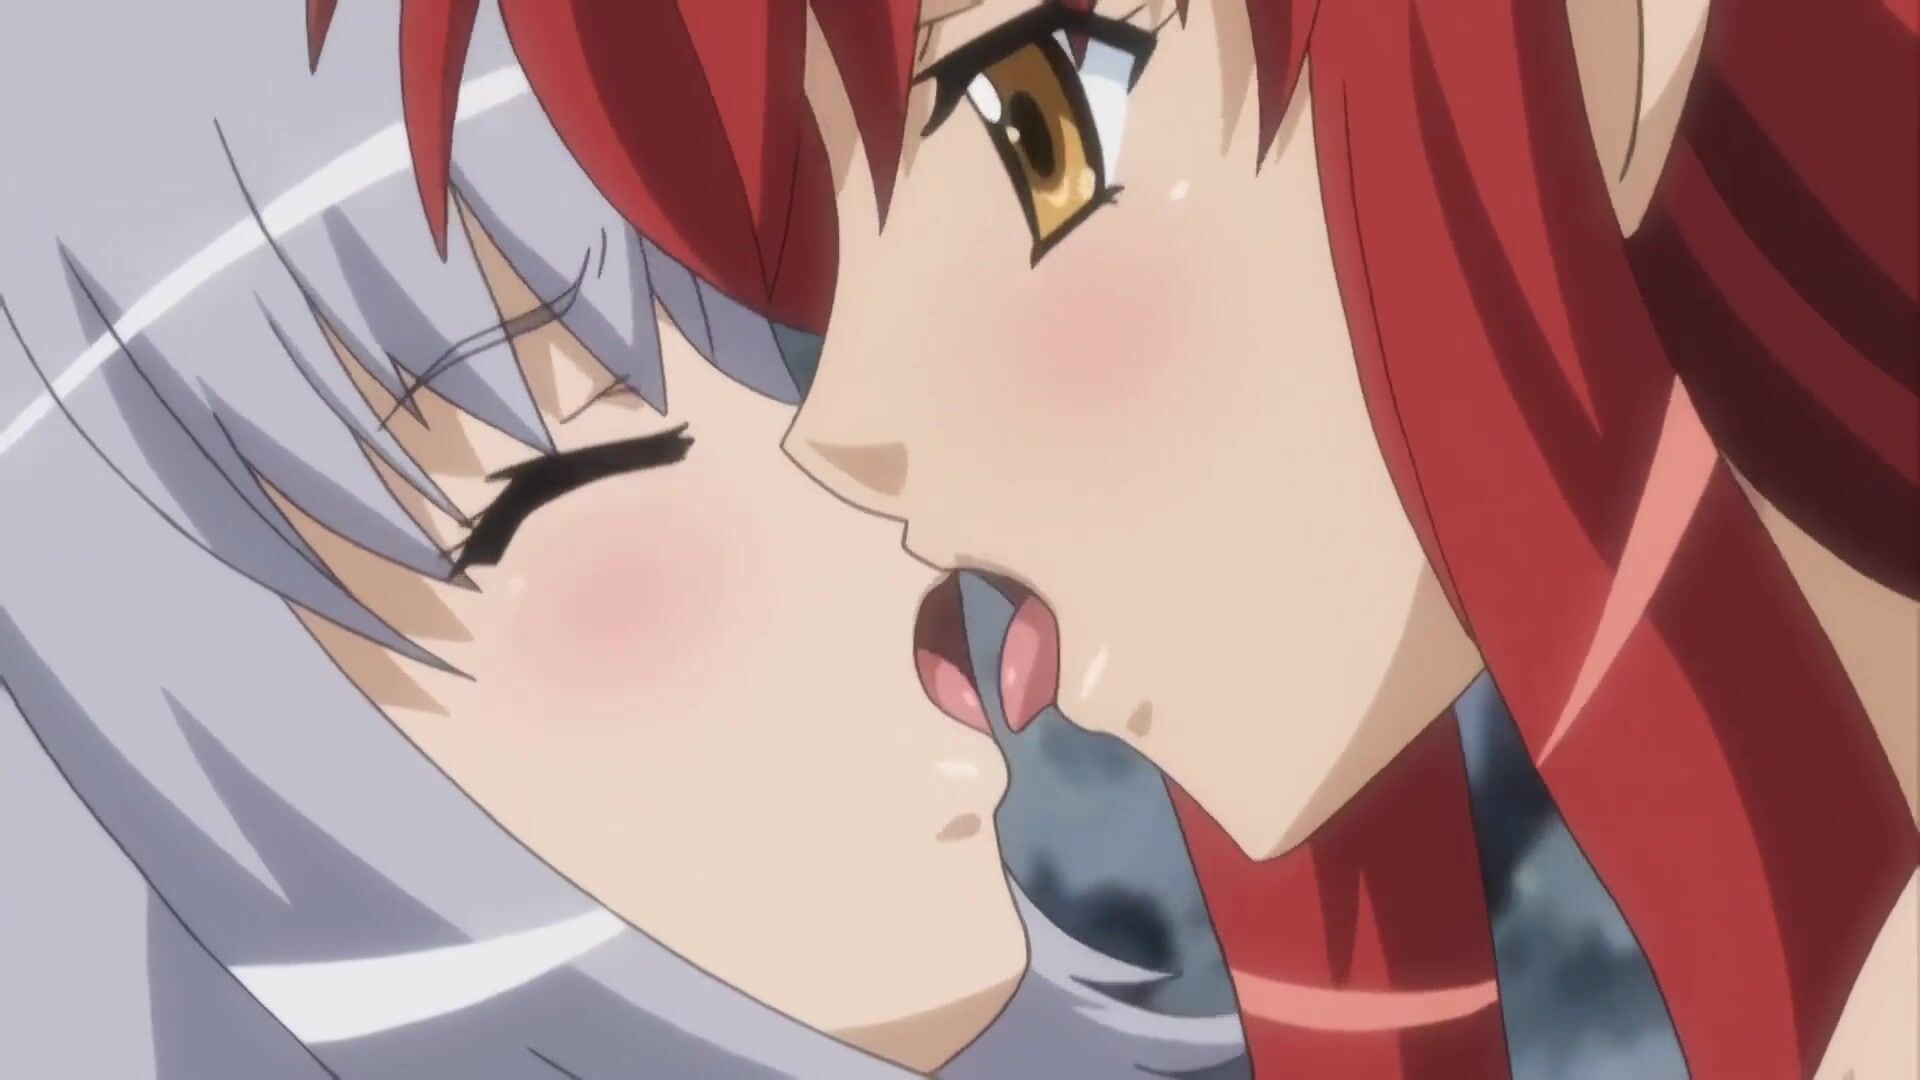 1920px x 1080px - Busty Hentai Redhead And White Eyed Lesbian With Tail Fingering